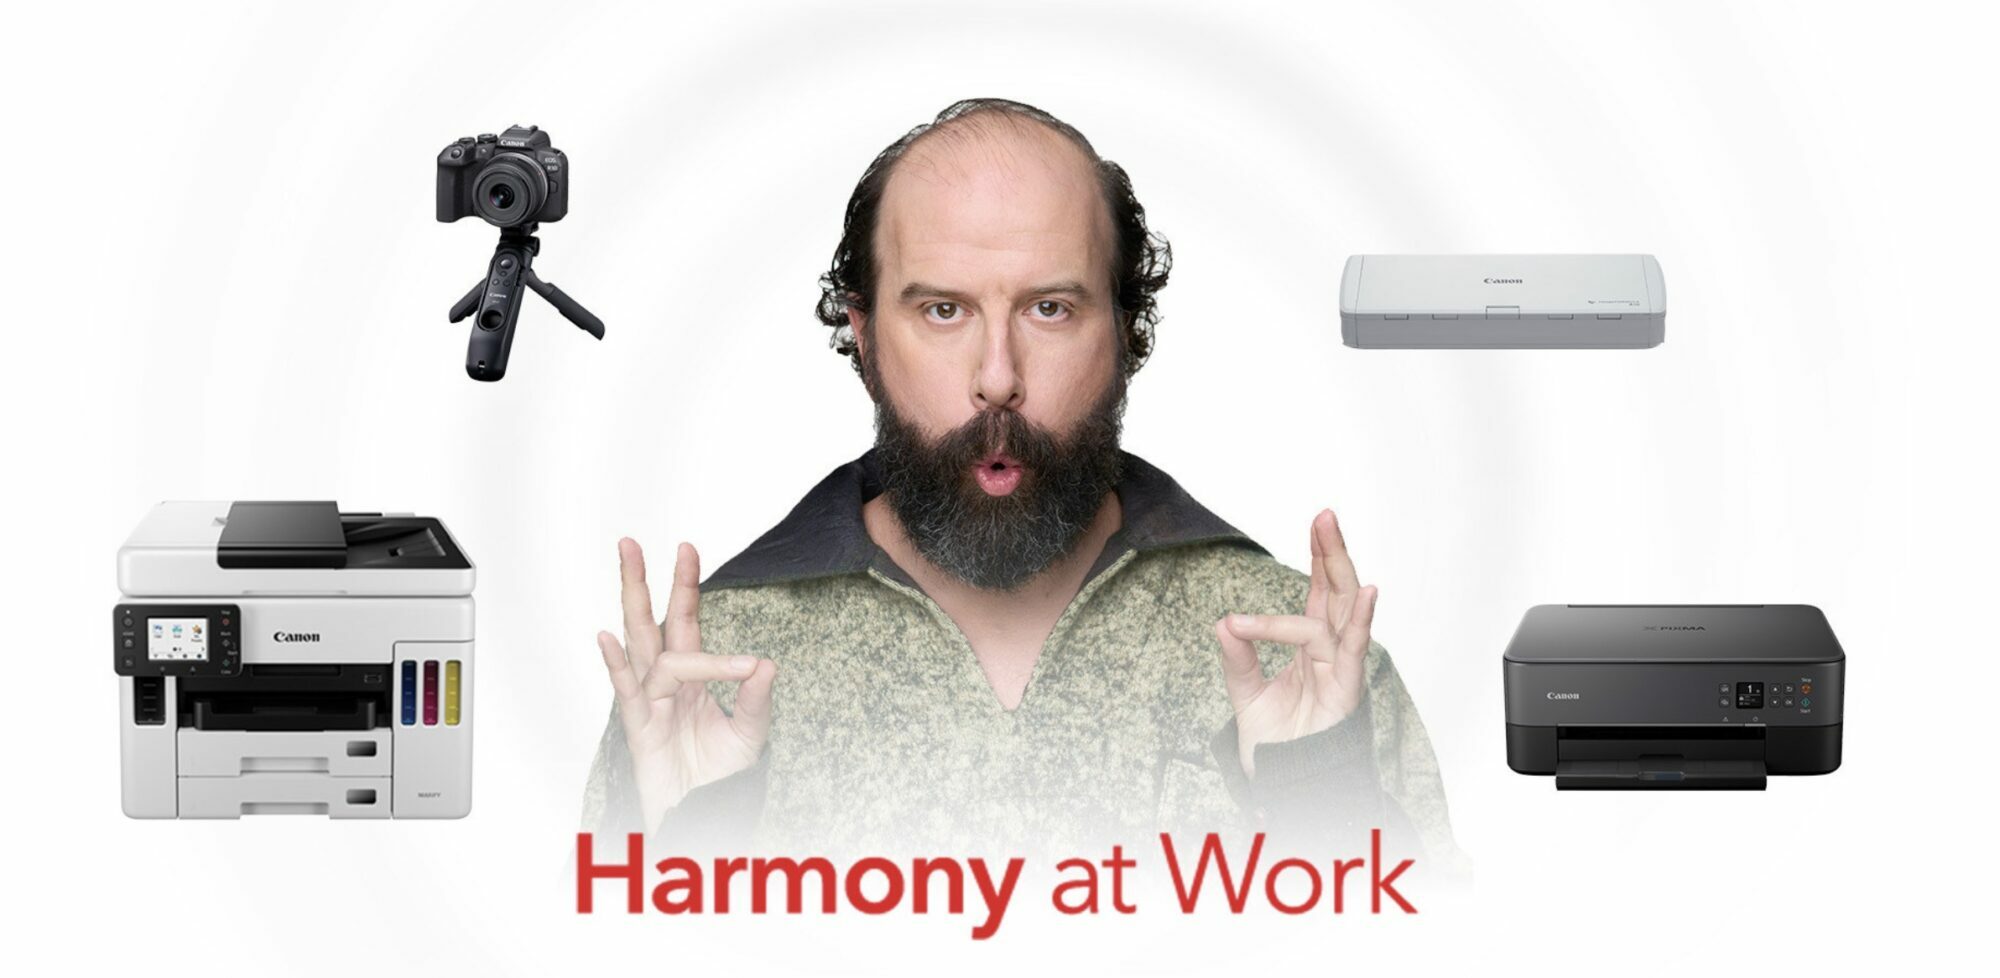 Canon Launches “Harmony at Work” Integrated Marketing Campaign